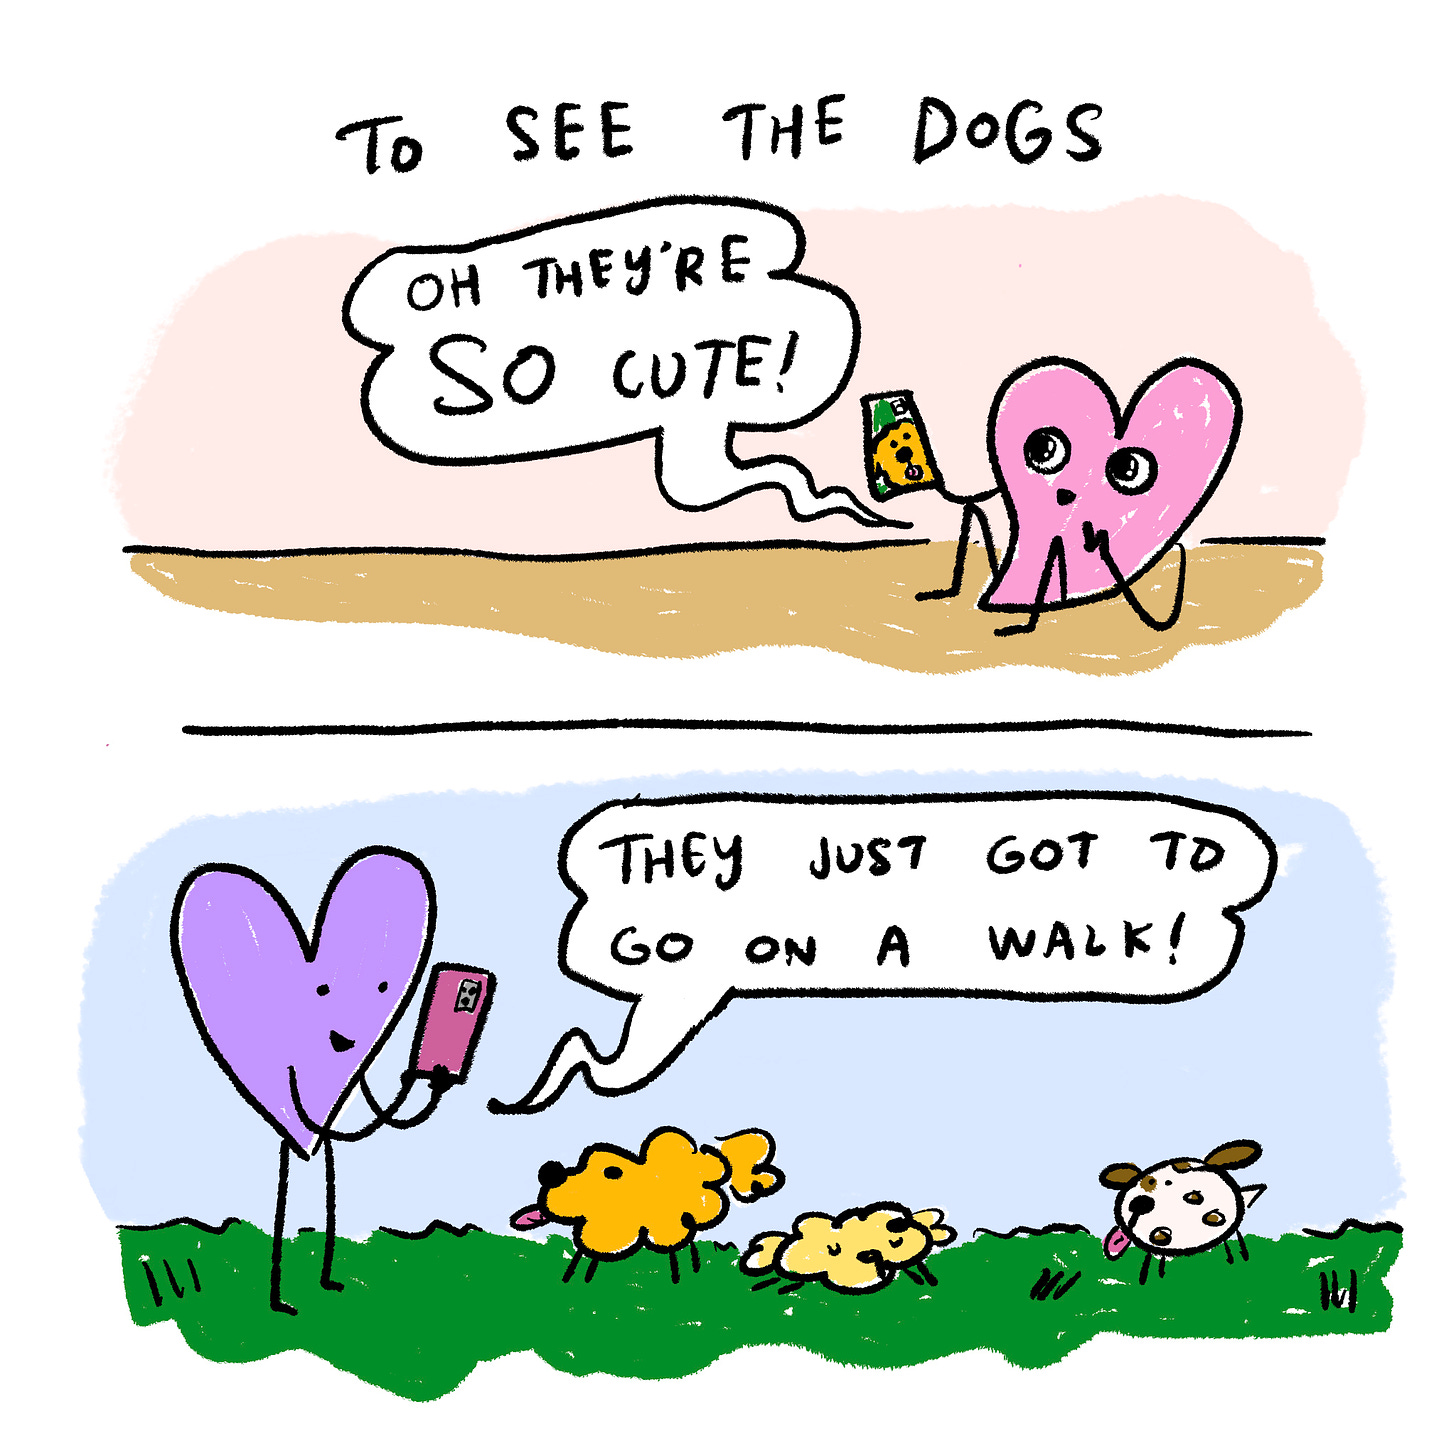  To see the dogs